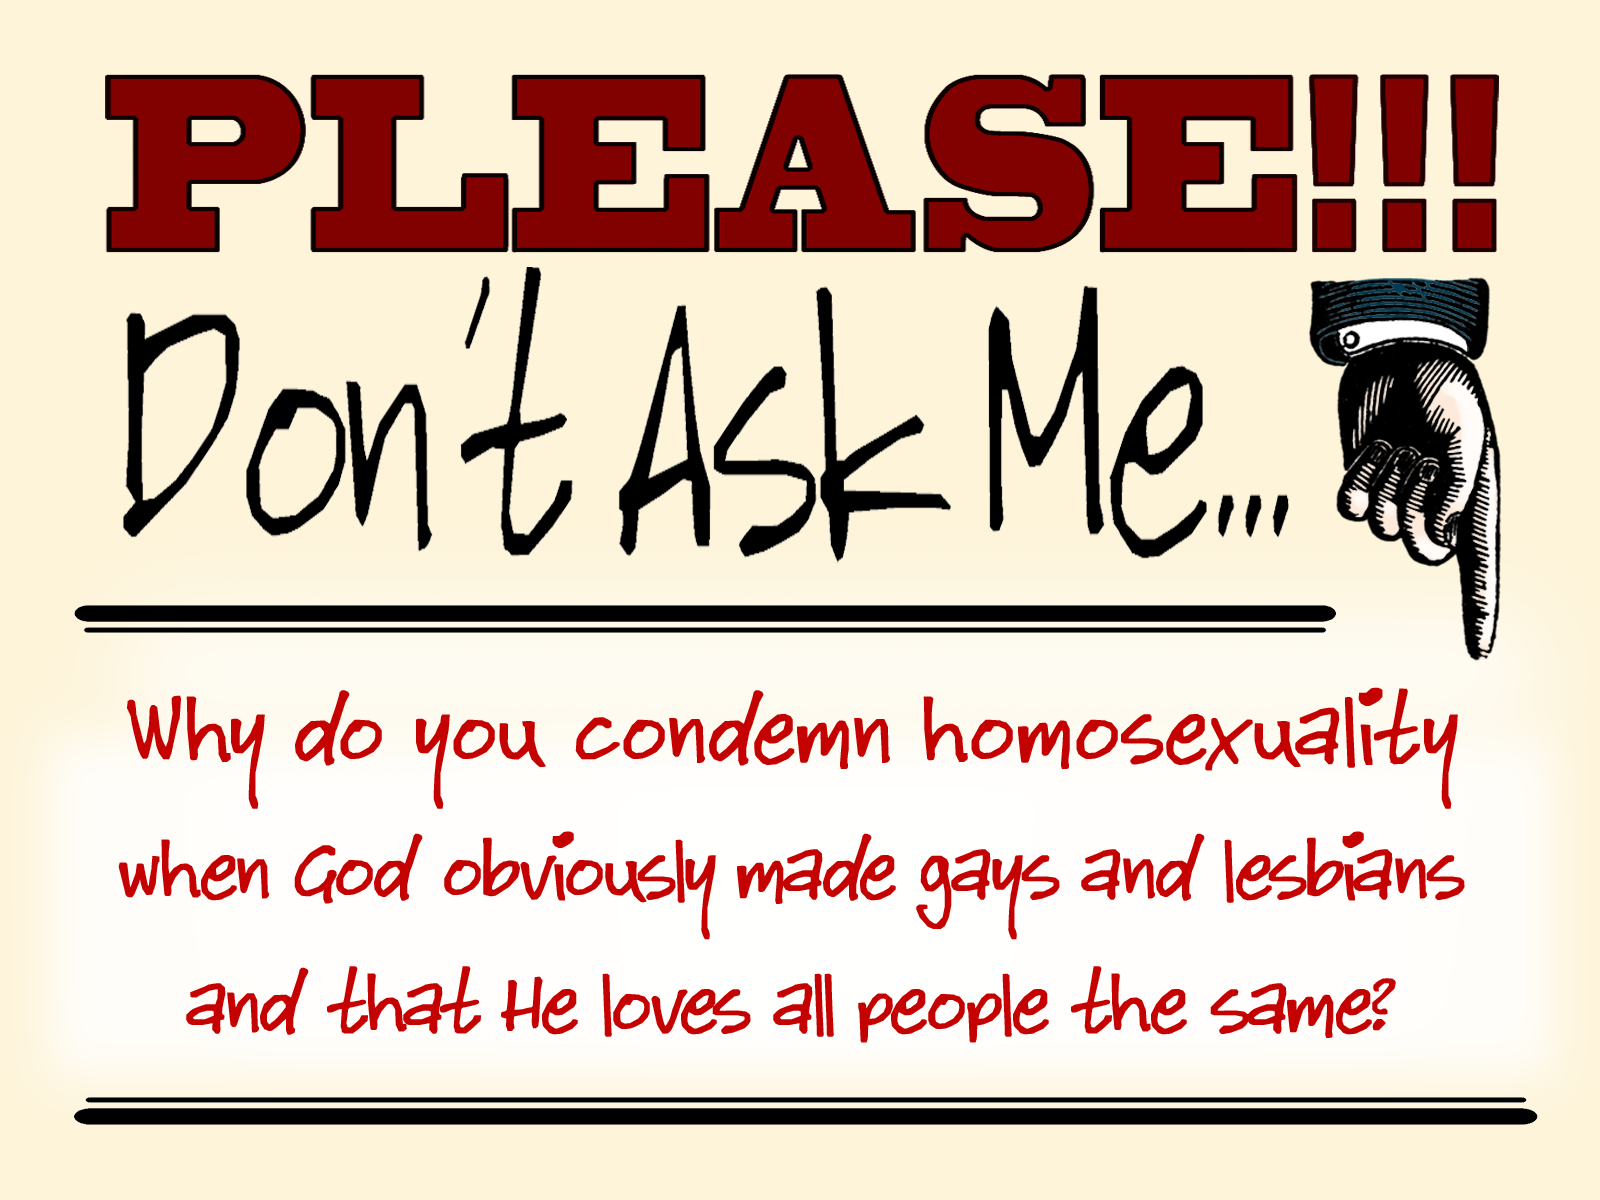 Please don’t ask me…“Why do you condemn homosexuality when God obviously made gays and lesbians and that He loves all people the same?” Part 2